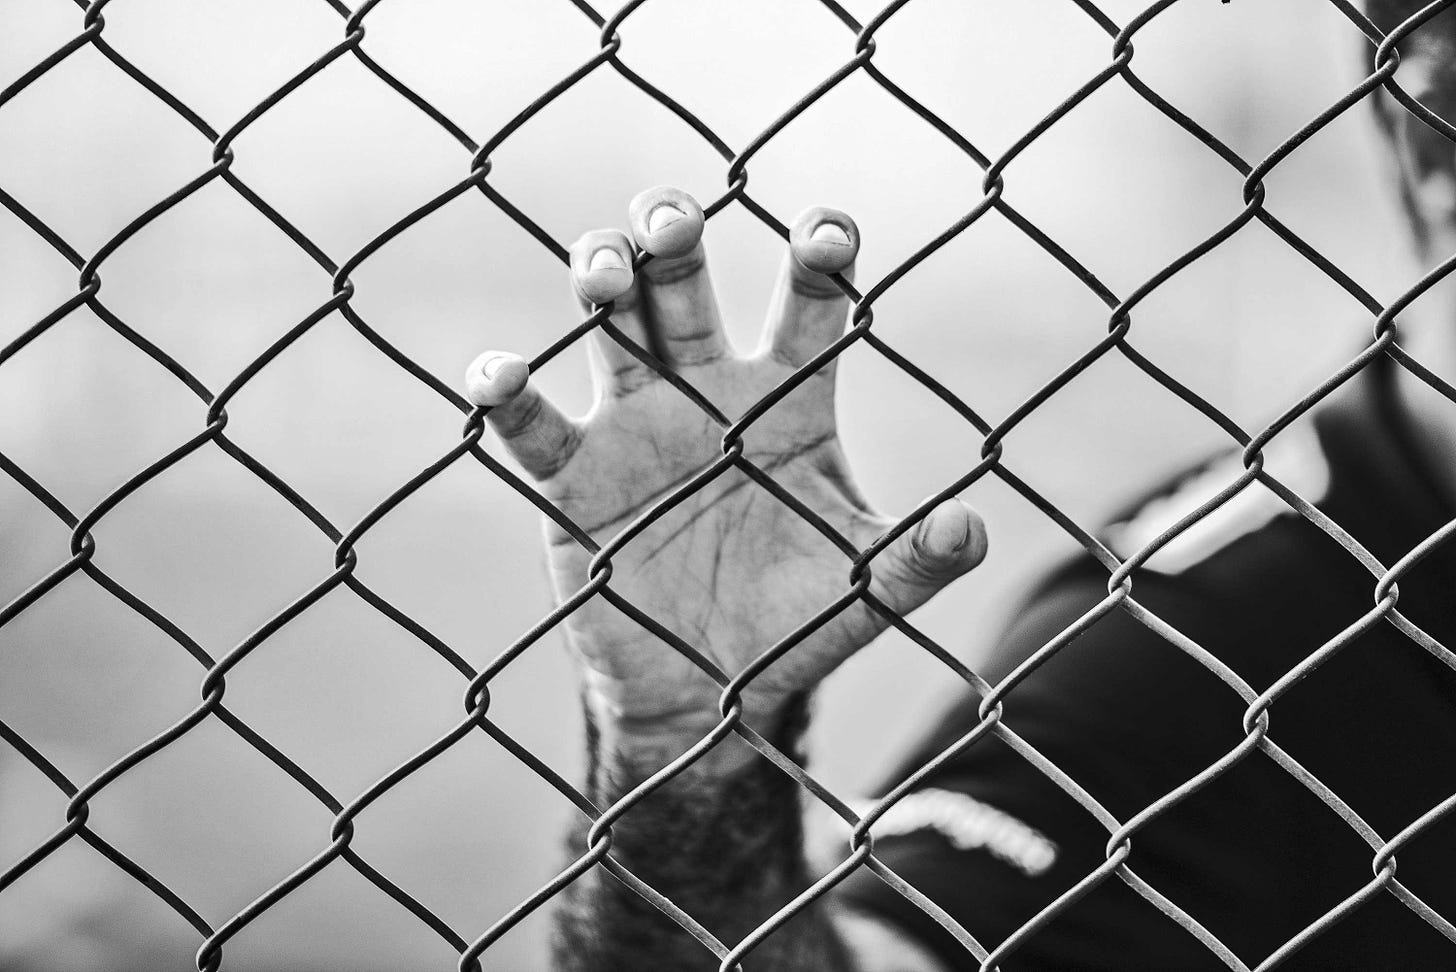 A man stands behind a chain link fence. He is blurred in the background while the focus is on his hand grasping the chain link fence. 